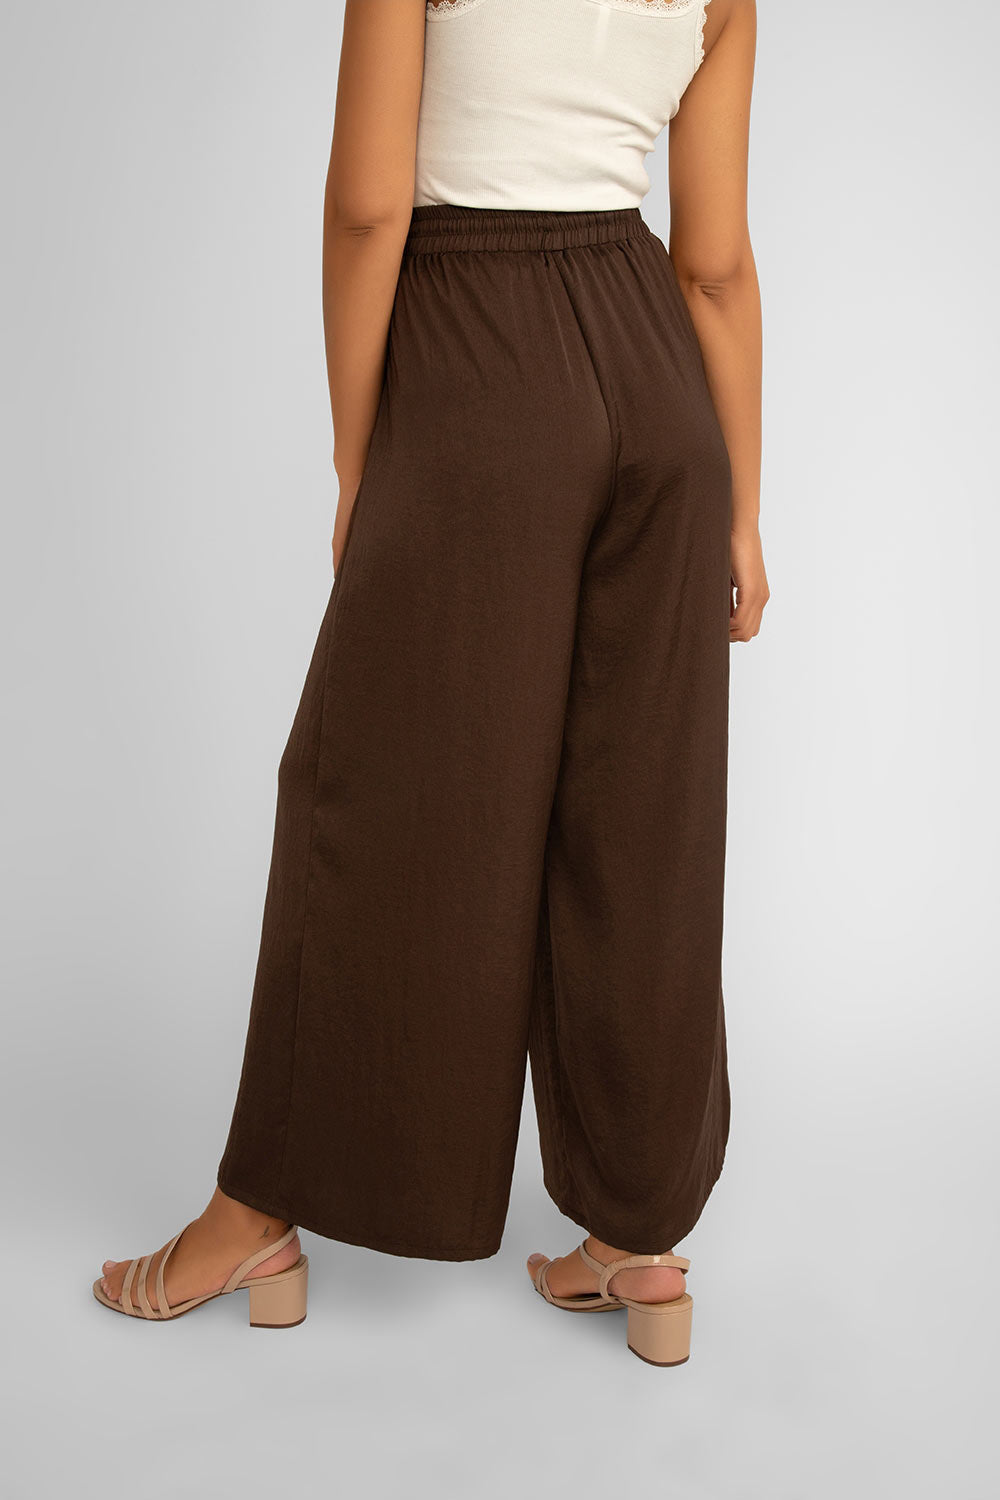 Back viw of Renuar Clothing (R10070-248) Women's Pull On Wide Leg Airflow Plazzo Pants in Chocolate Brown